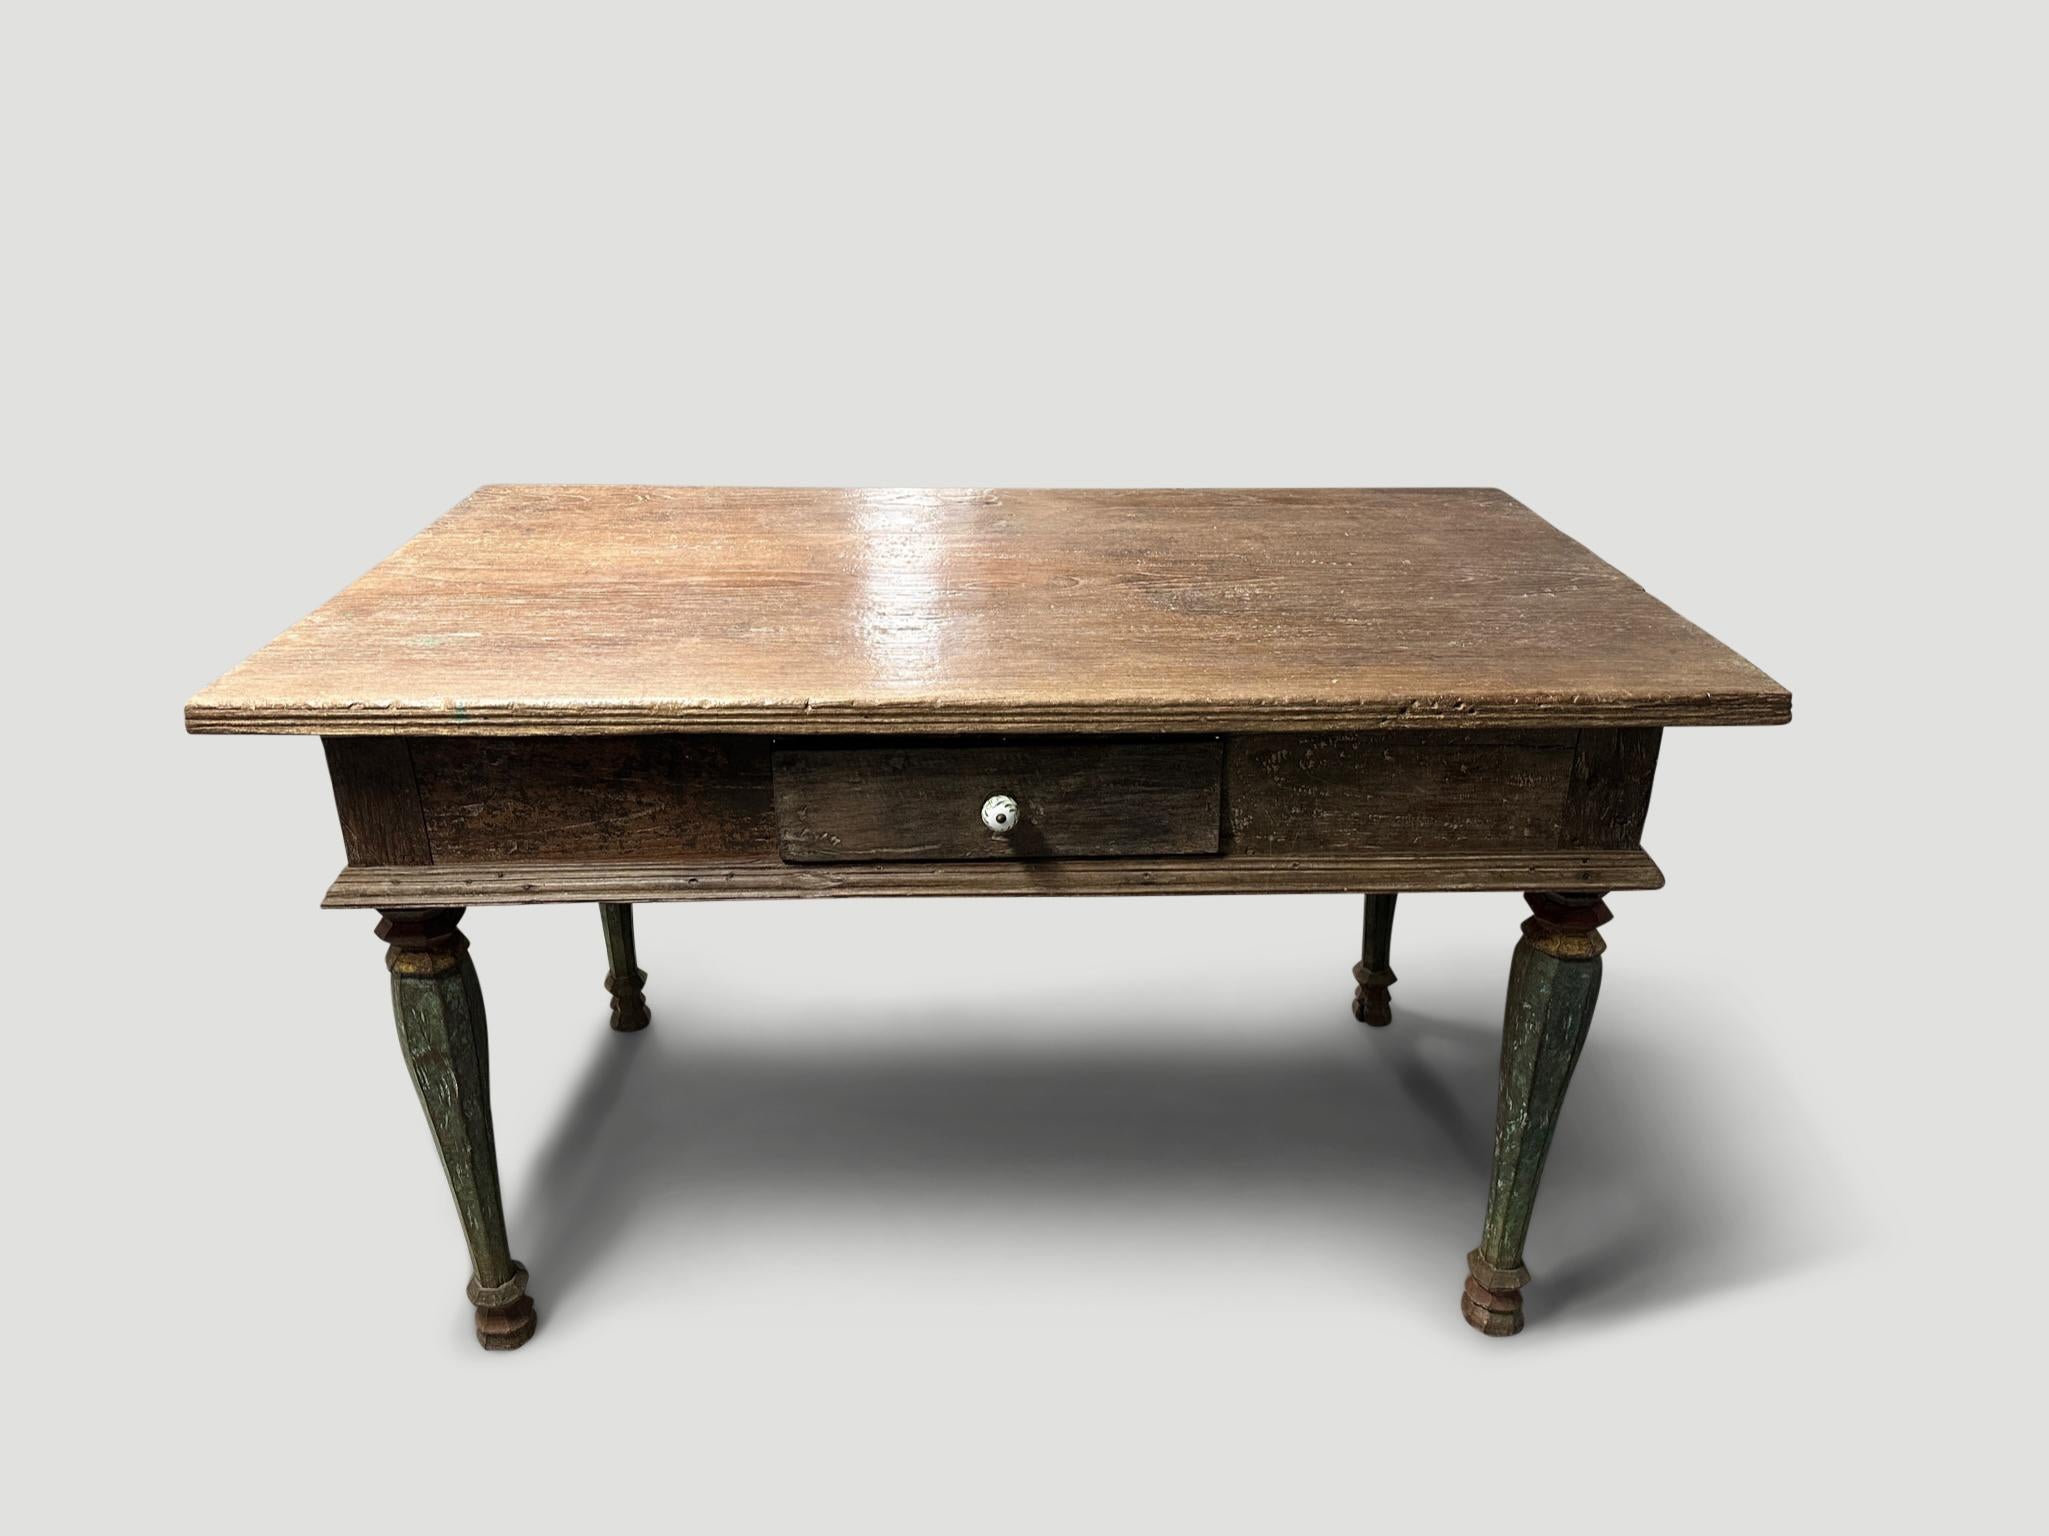 Andrianna Shamaris Rare Antique Teak Wood Console or Desk In Excellent Condition For Sale In New York, NY